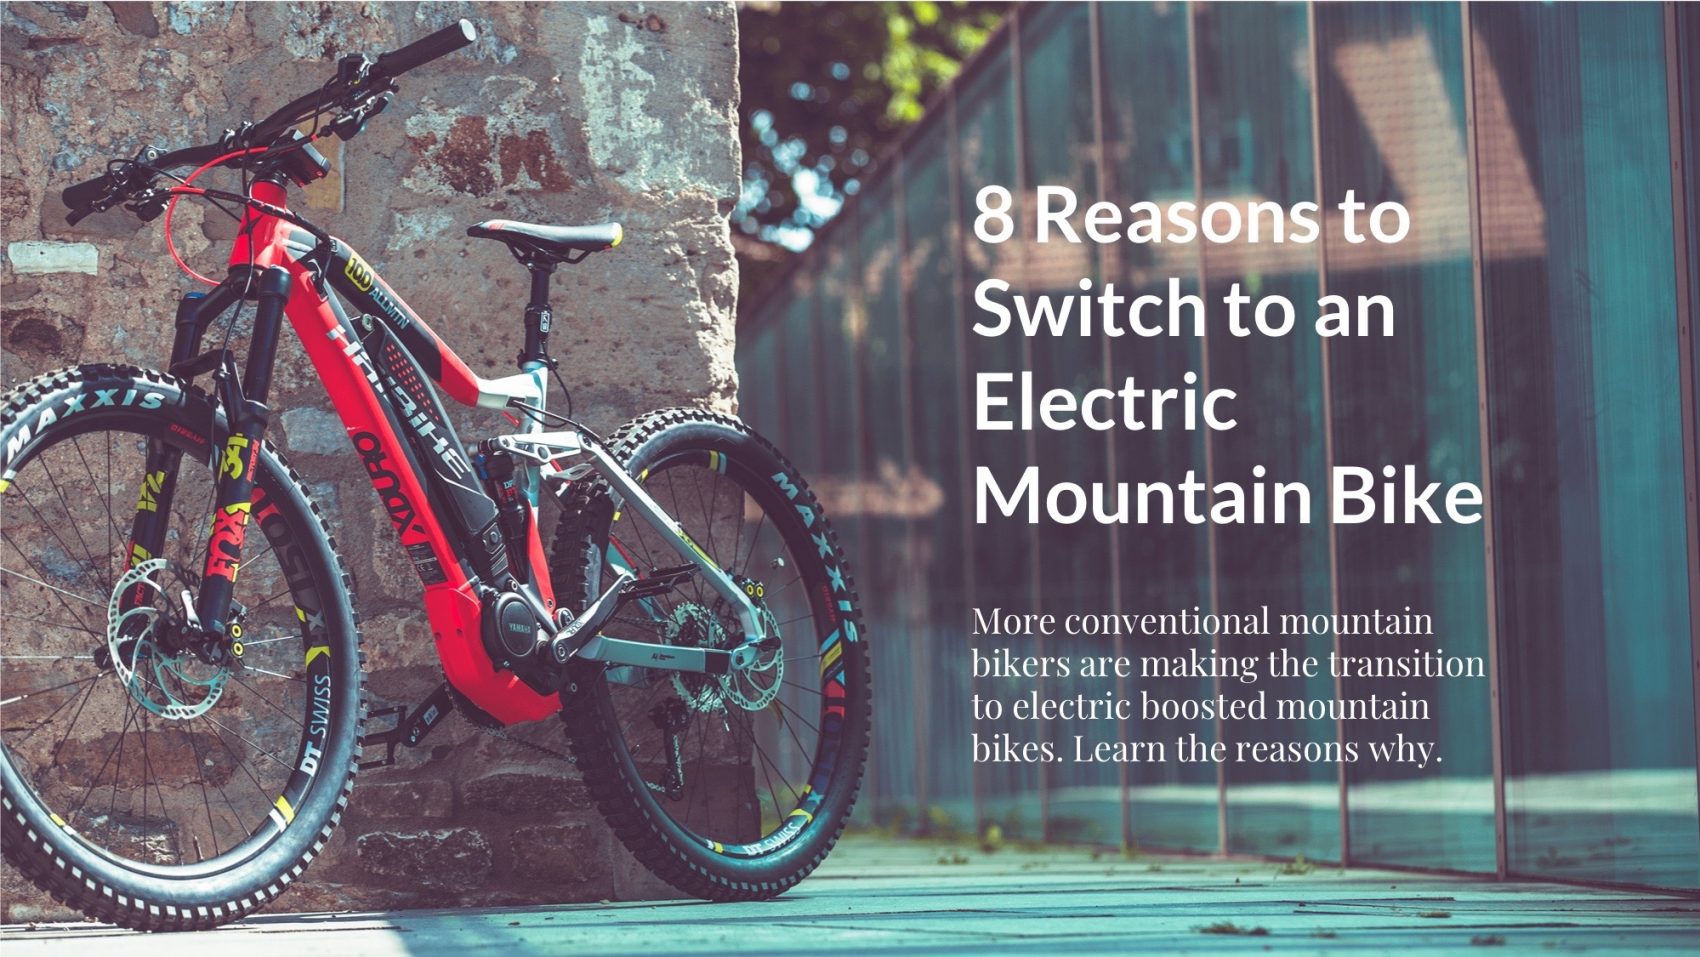 8-reasons-to-switch-to-an-electric-mountain-bike